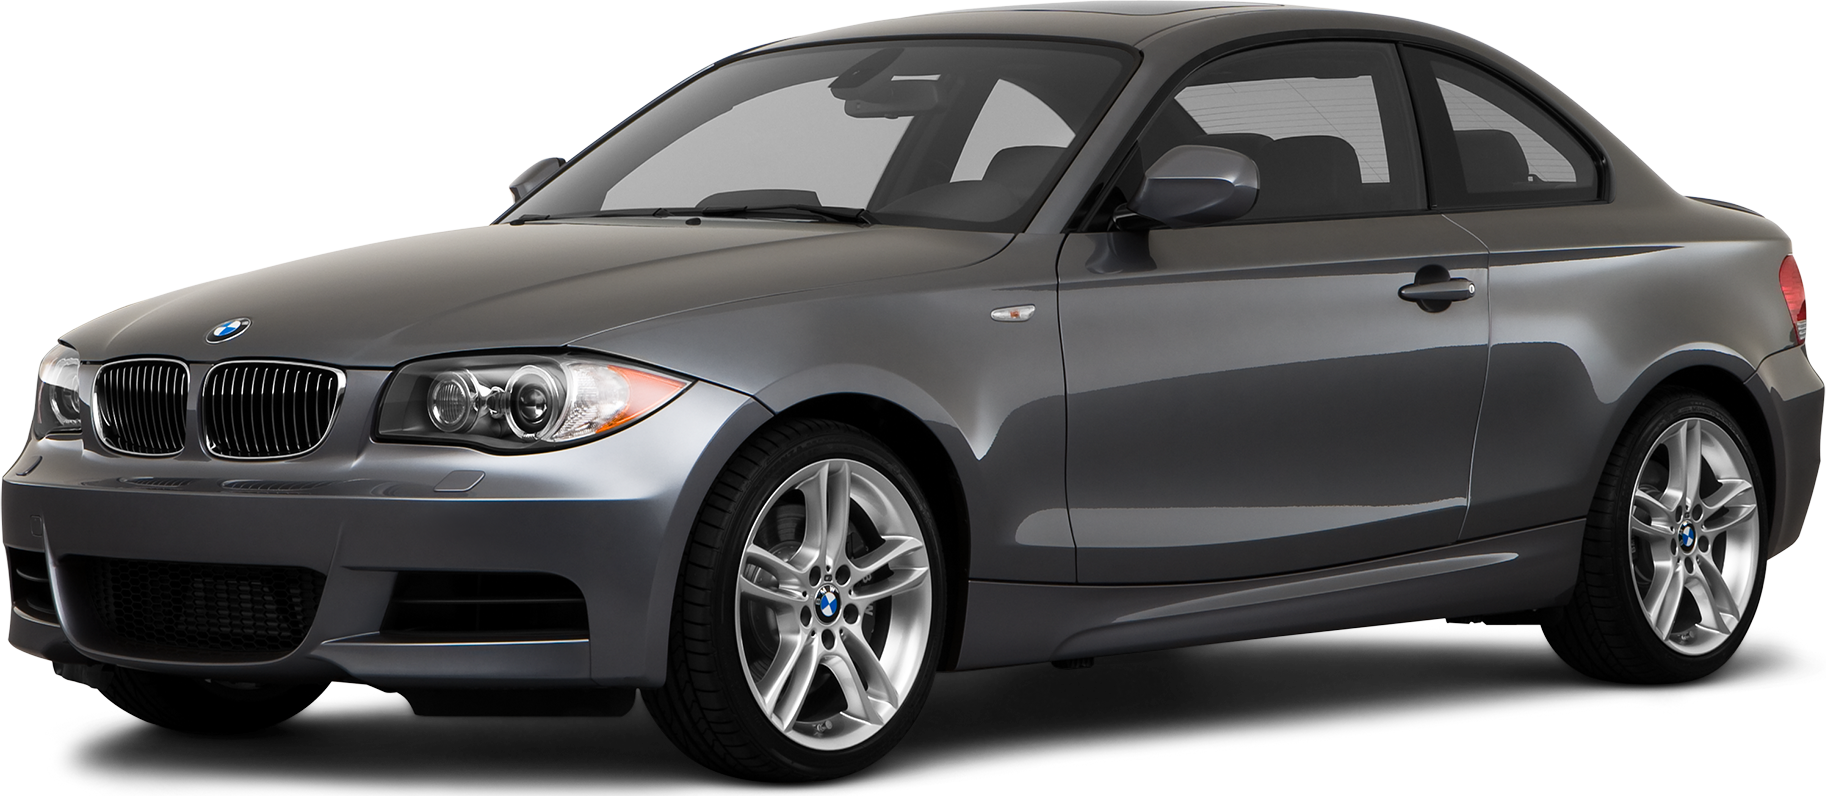 10 Bmw 1 Series Values Cars For Sale Kelley Blue Book